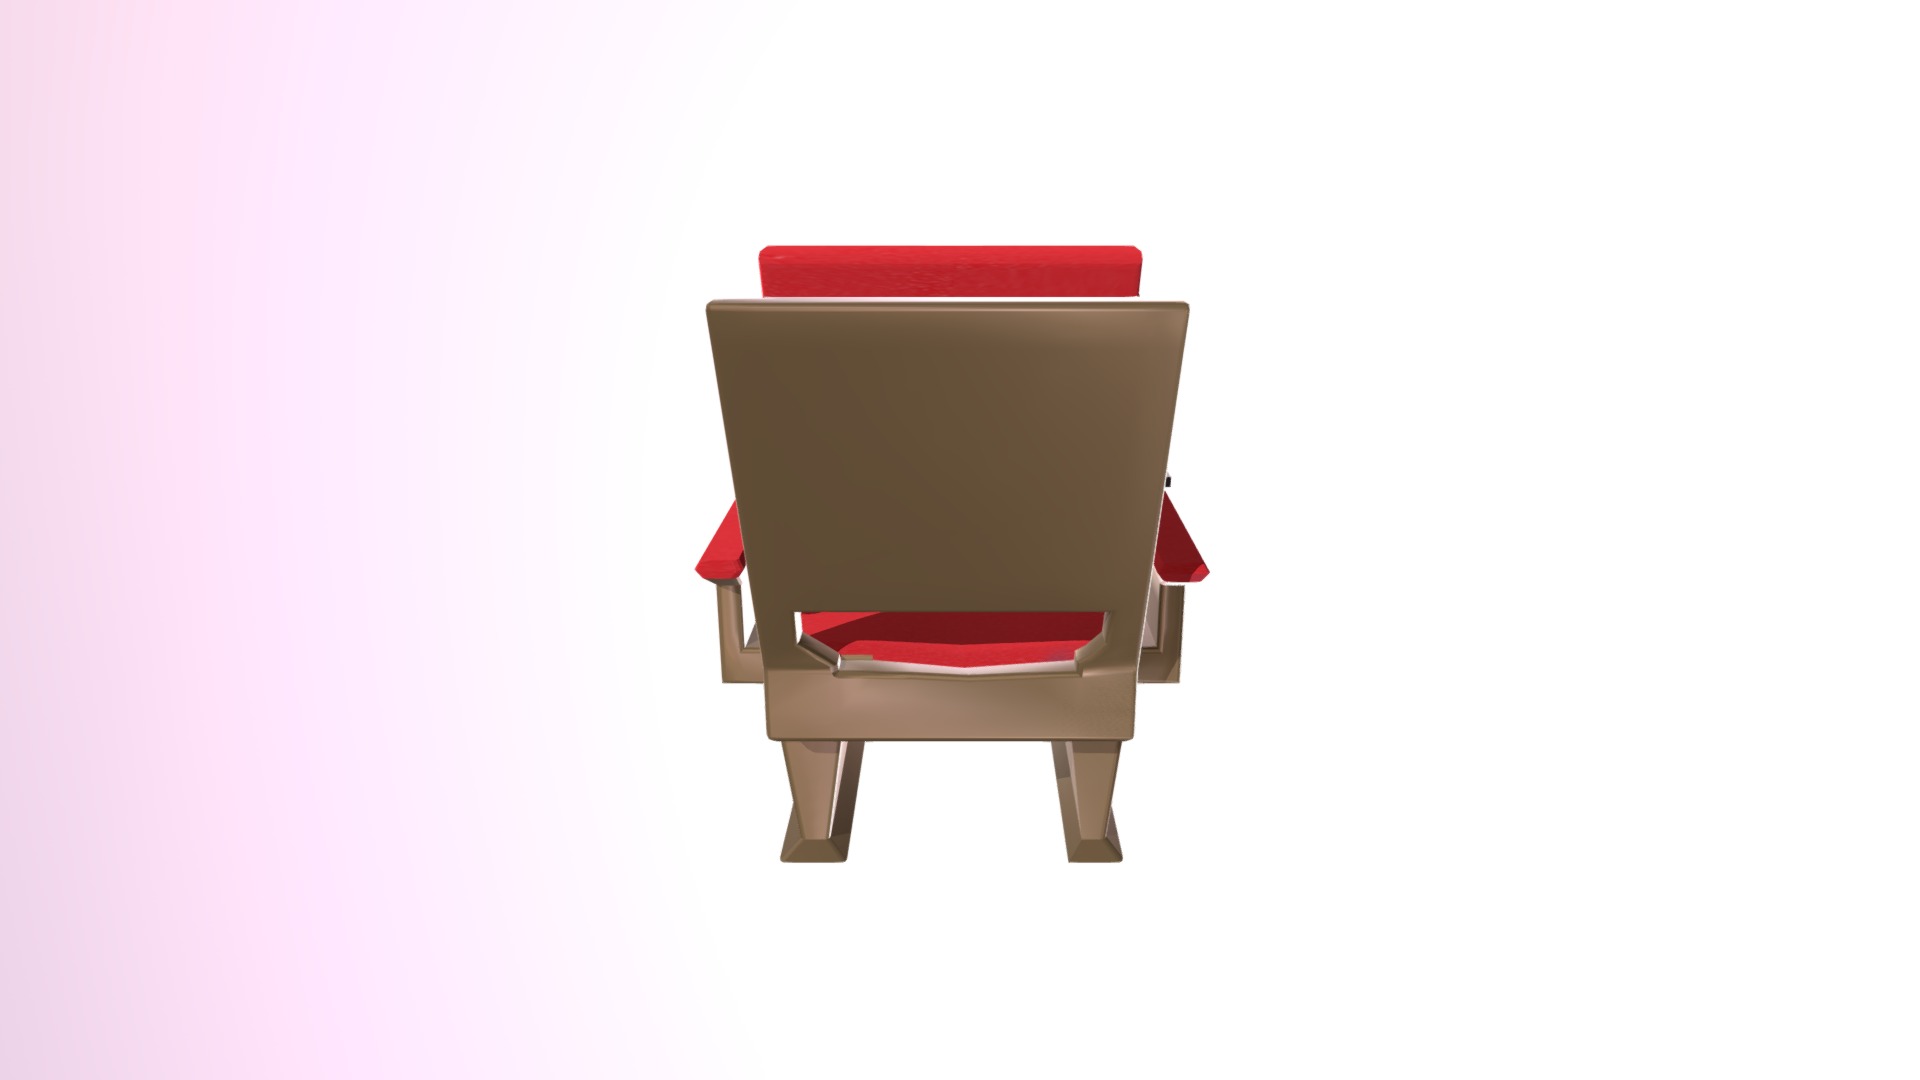 Old Cinema chair - Chair - 3D model by DarkWhiteWolf3 3d model